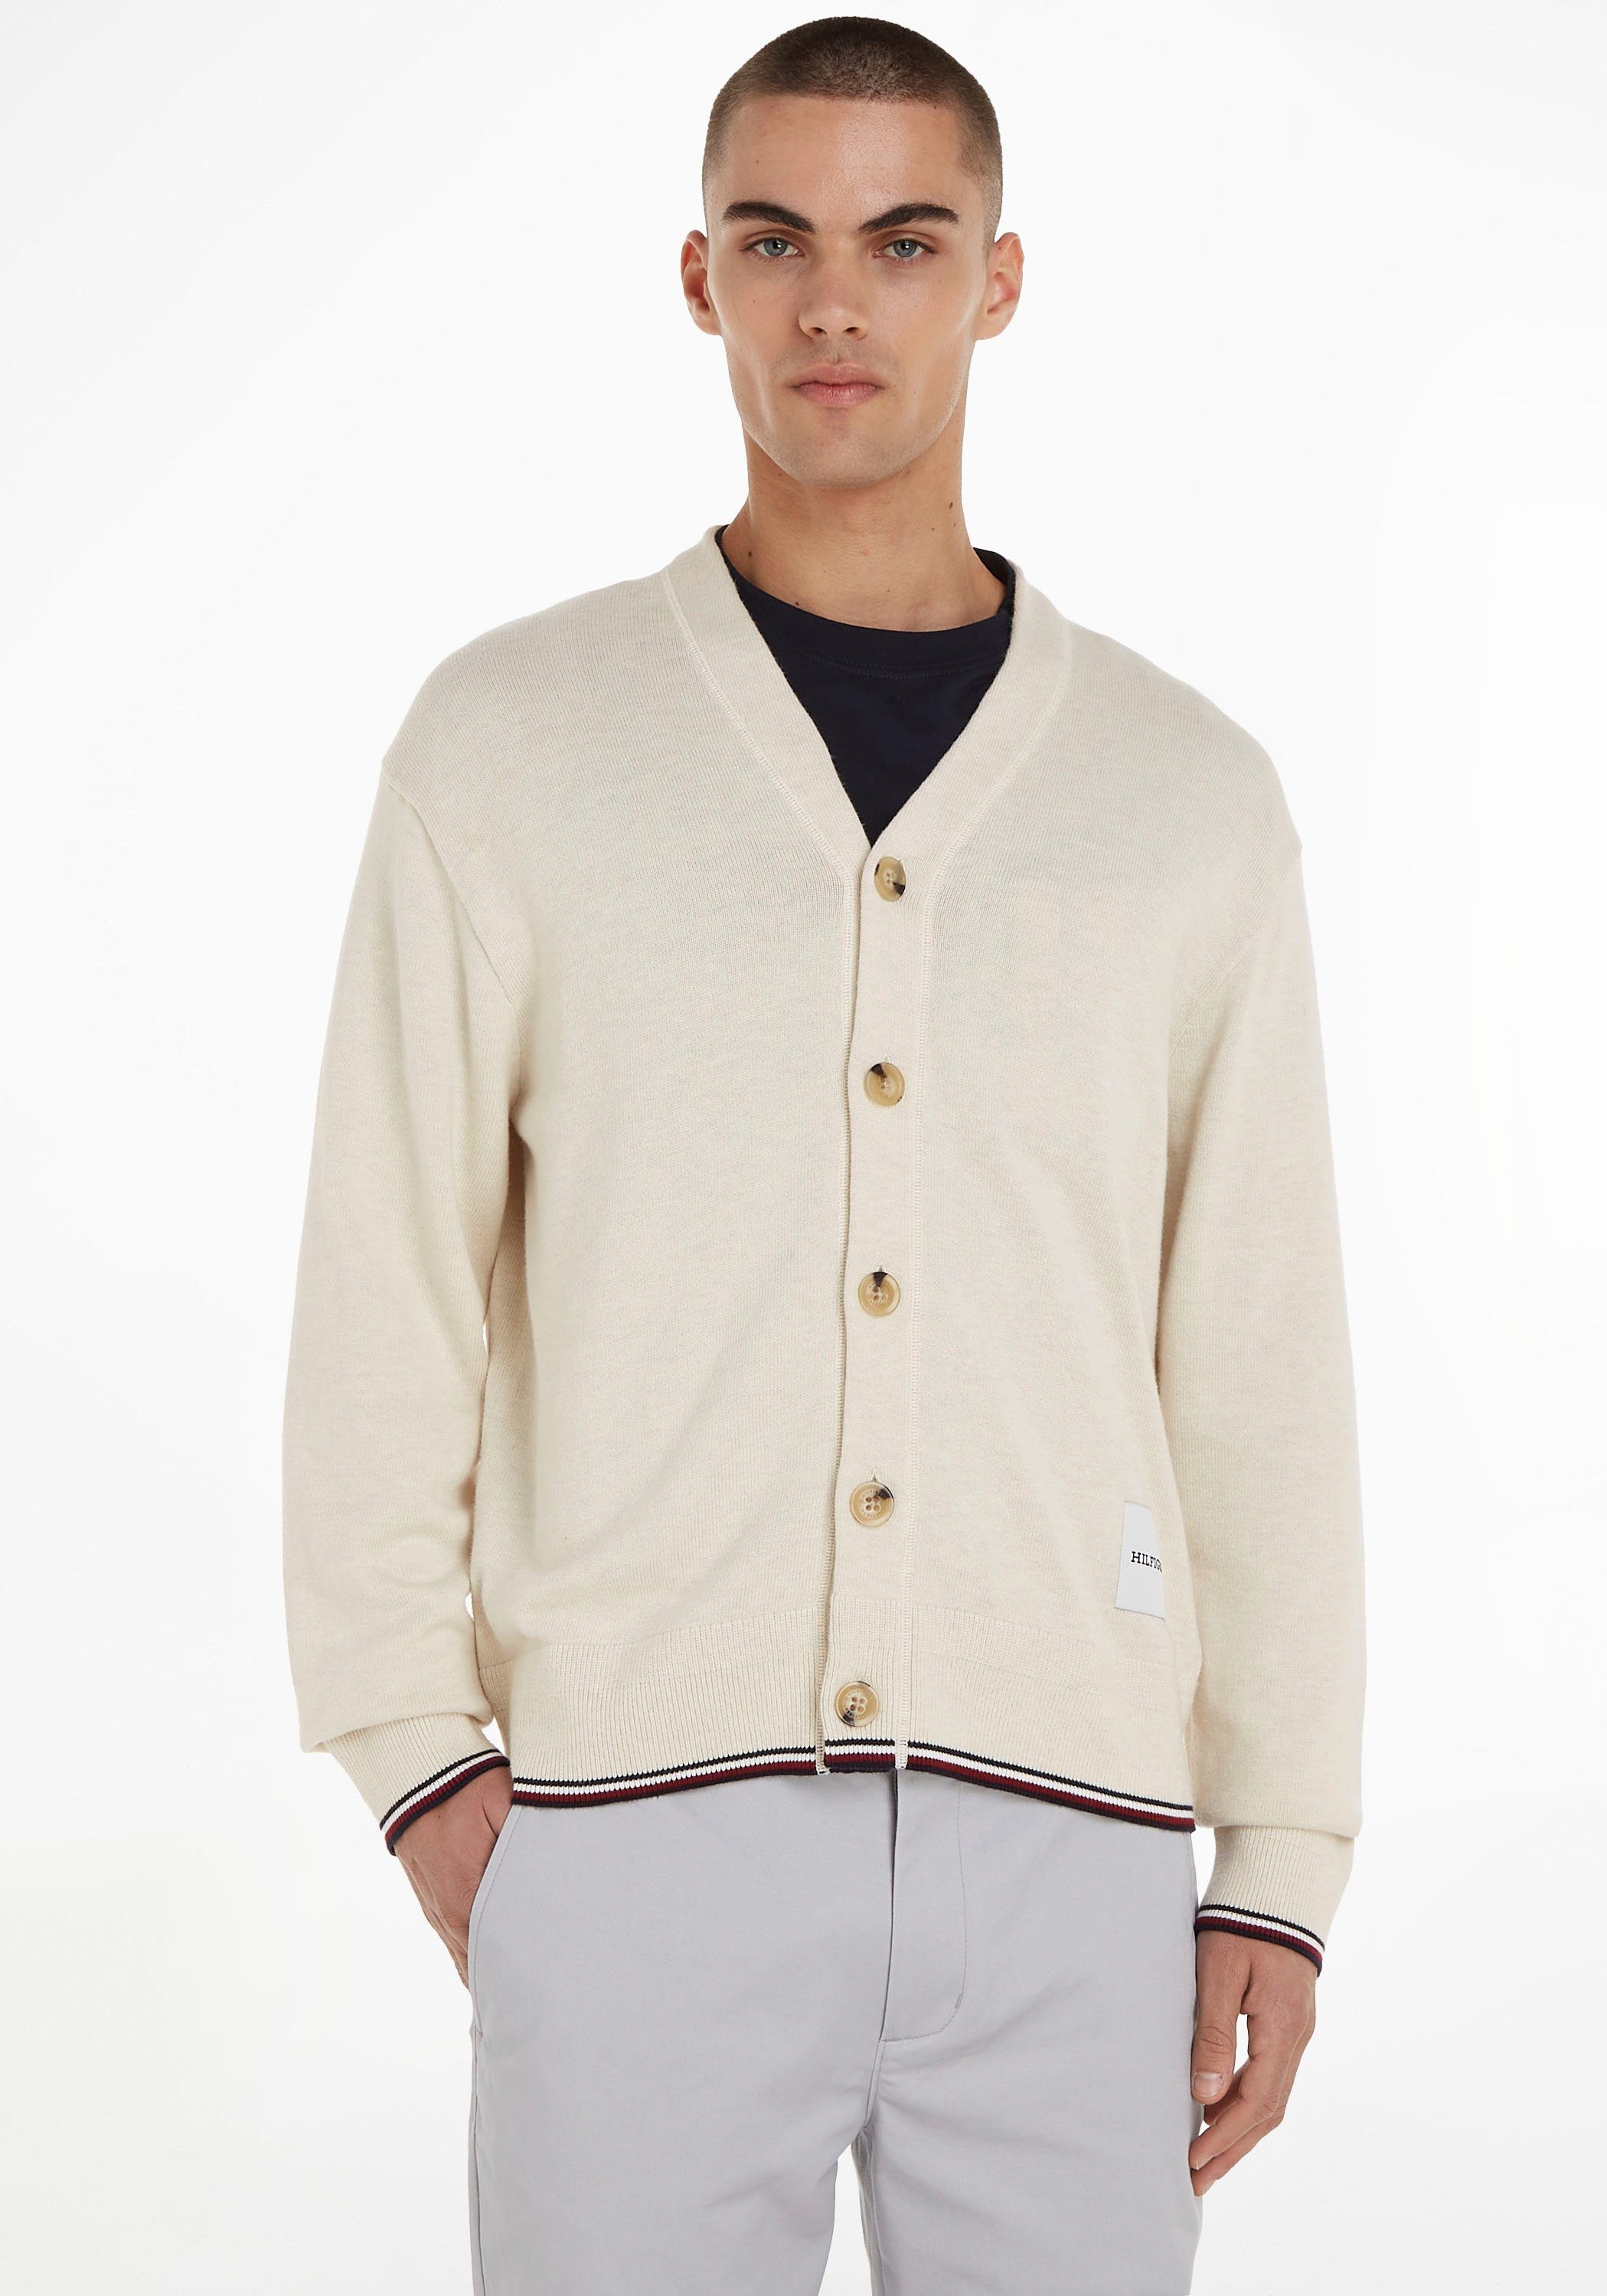 CARDIGAN Sweatshirt Weathered Heather GS TIPPED MONOTYPE Hilfiger White Tommy